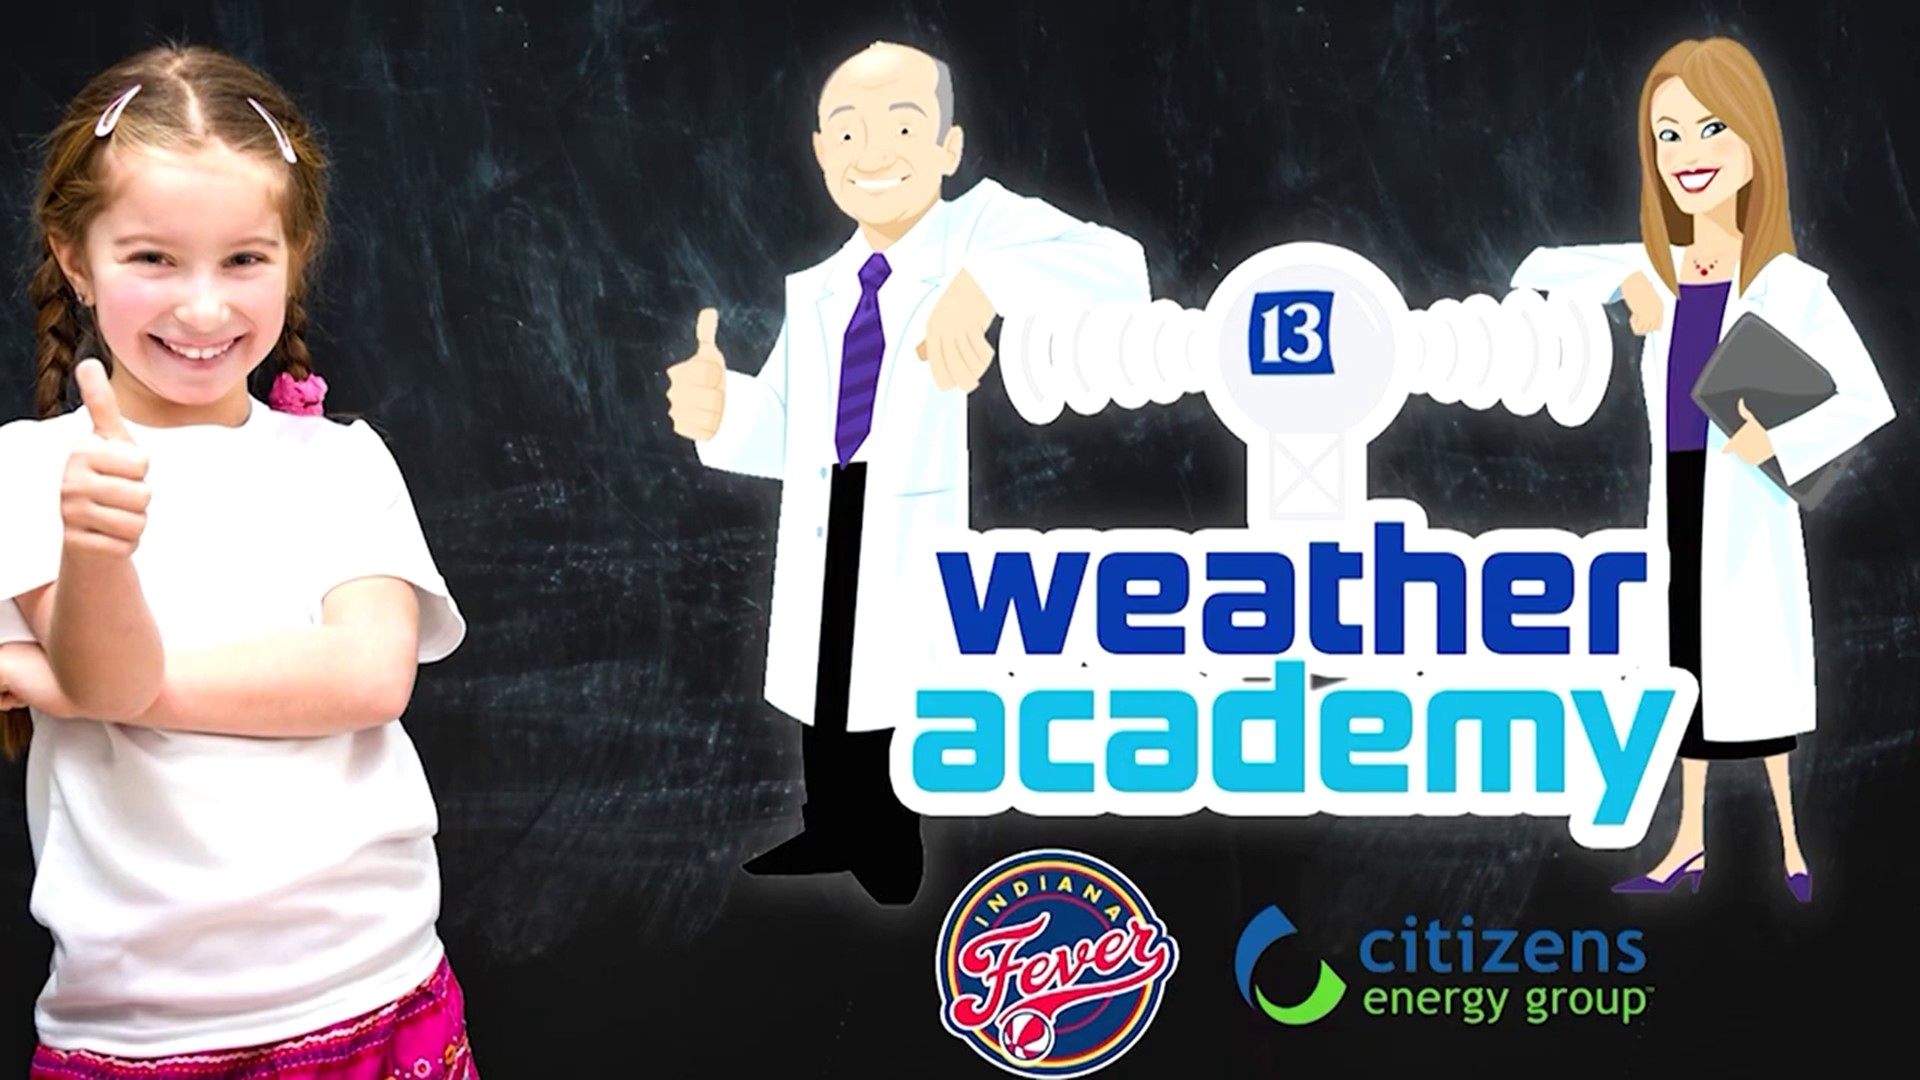 13 Meteorologist Kelly Greene shows us at home experiments to create our own storms!